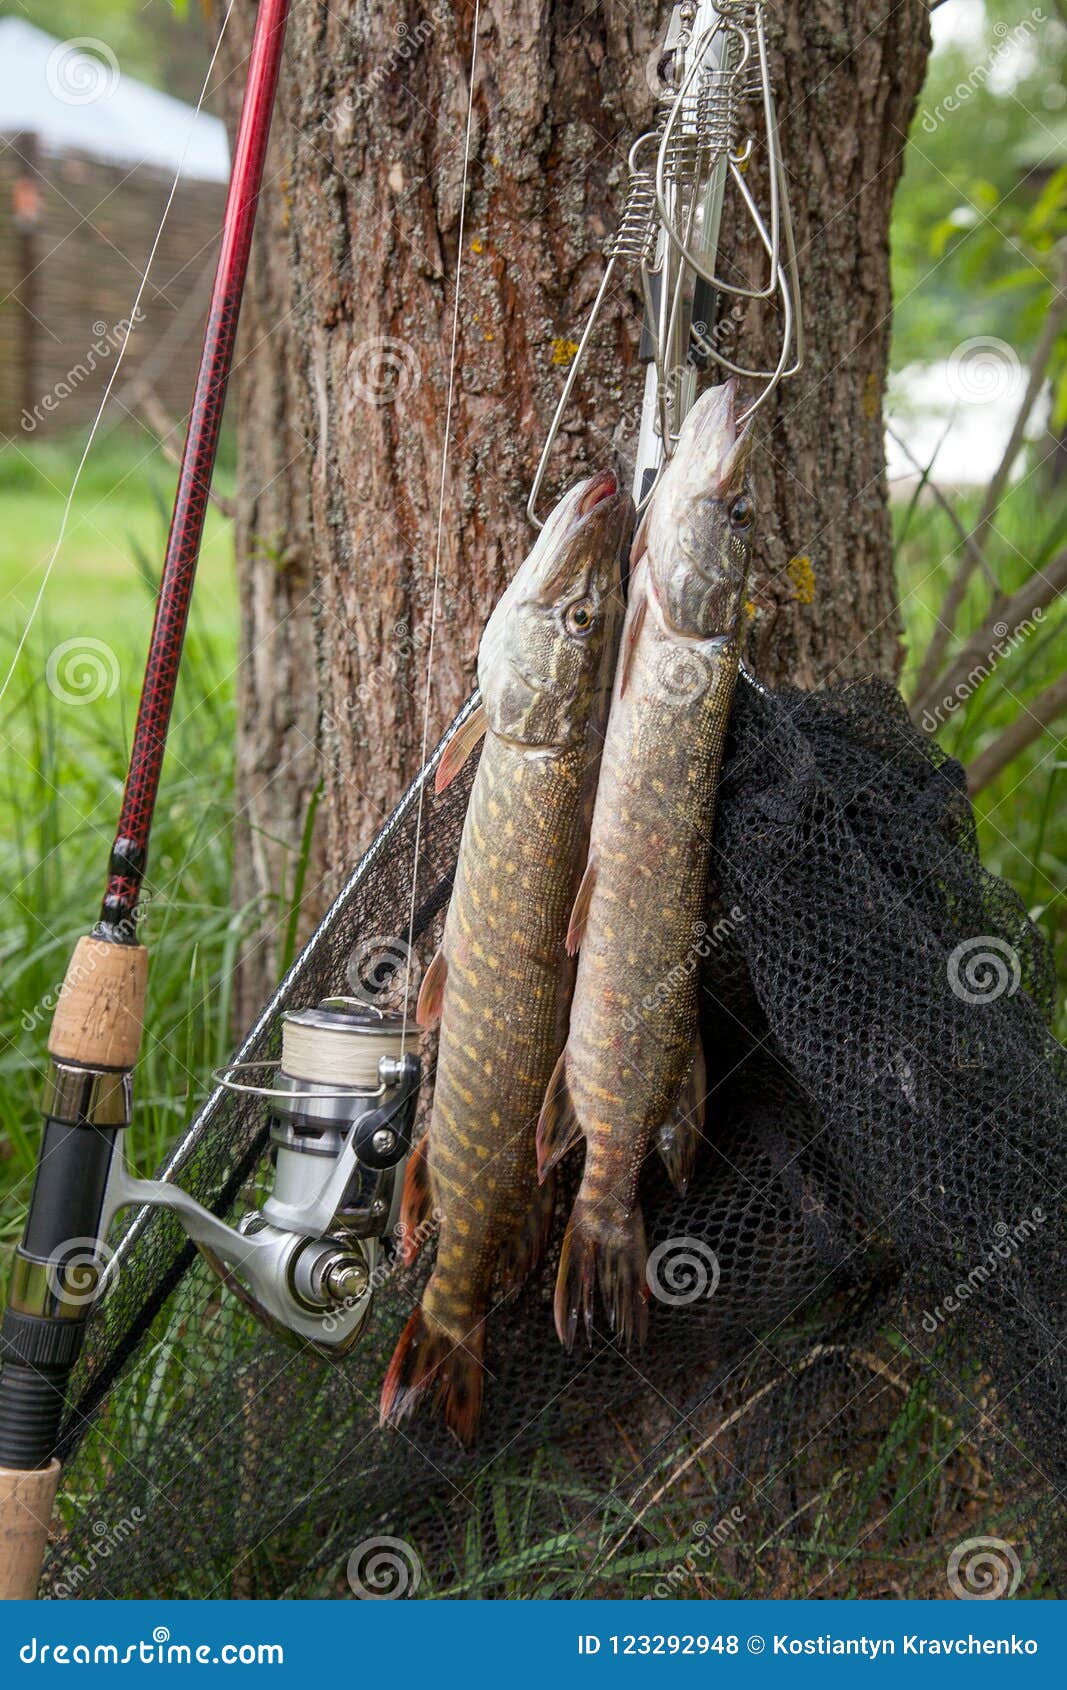 https://thumbs.dreamstime.com/z/freshwater-northern-pike-fish-know-as-esox-lucius-fish-stringer-fishing-equipment-fishing-concept-good-catch-big-freshwater-123292948.jpg